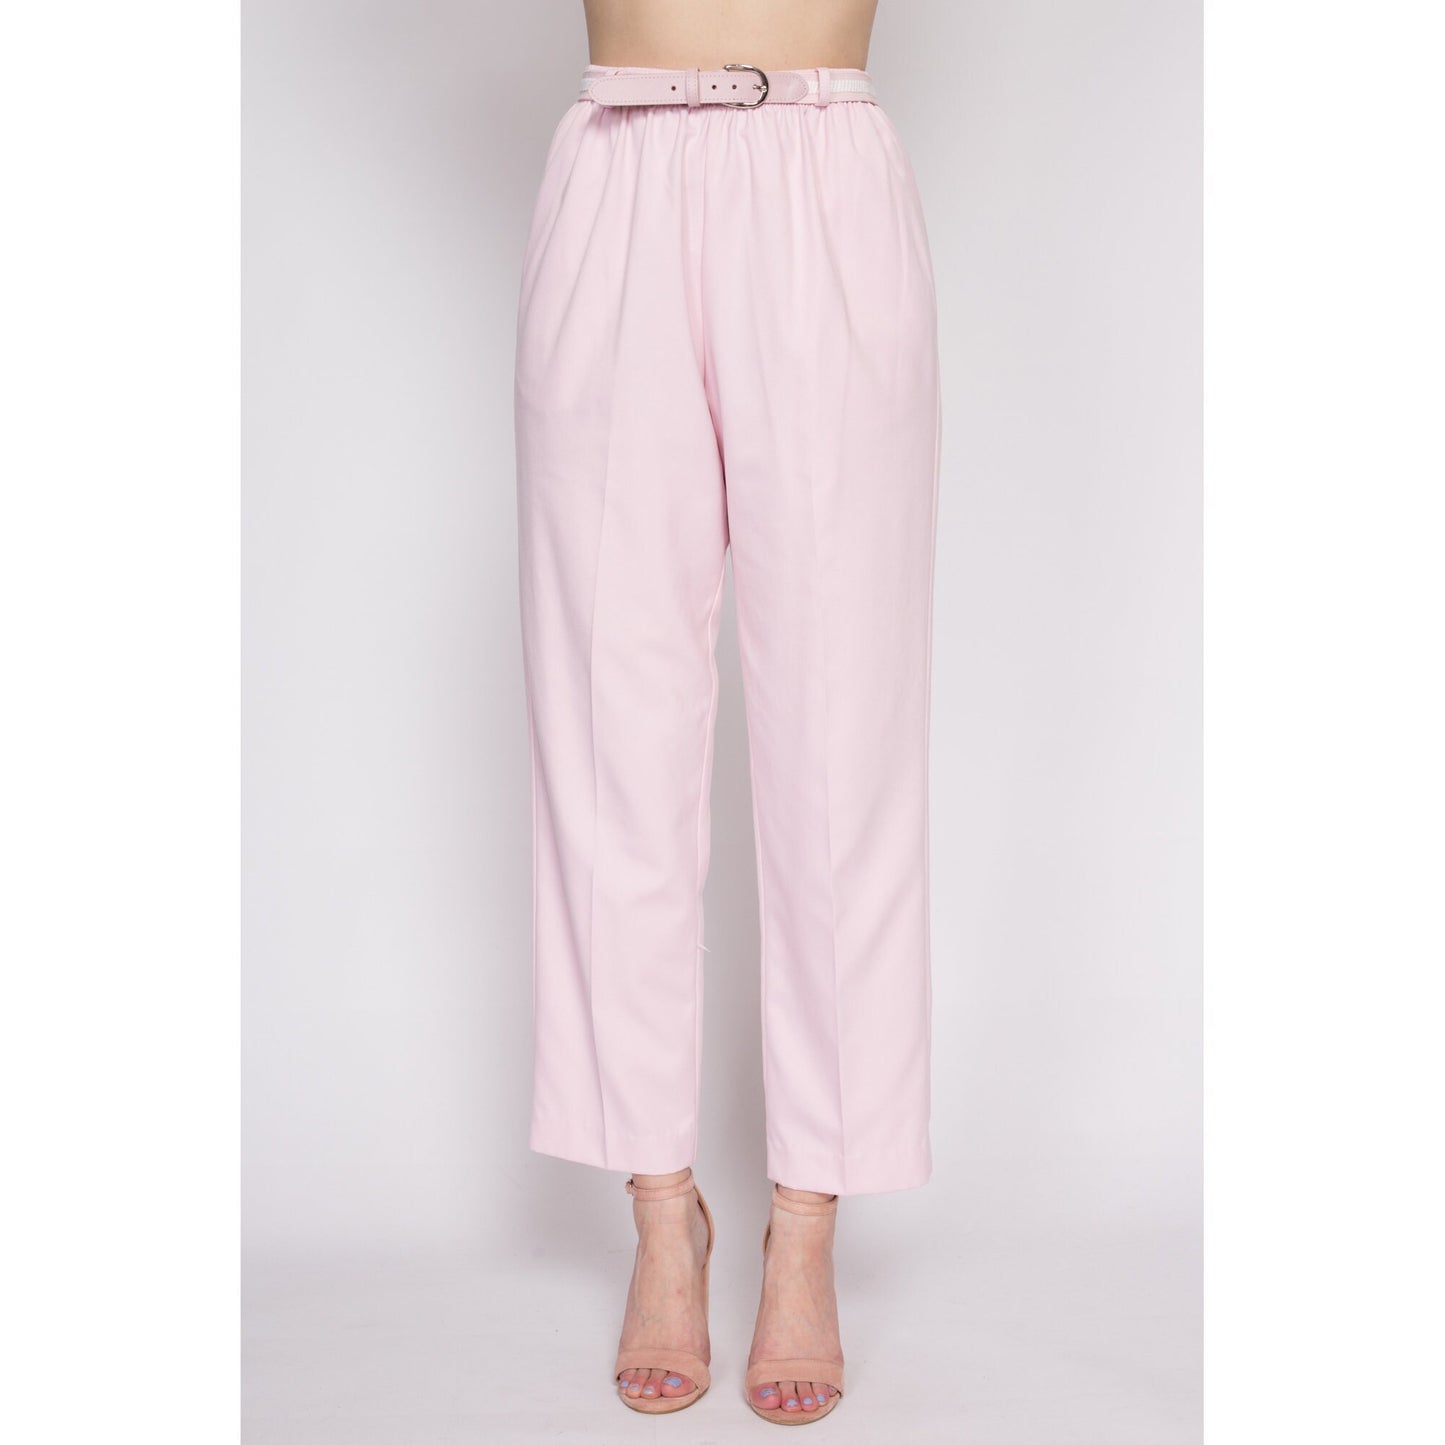 M| 80s Pink High Waist Belted Pants - Medium | Vintage Tapered Leg Elastic Casual Trousers